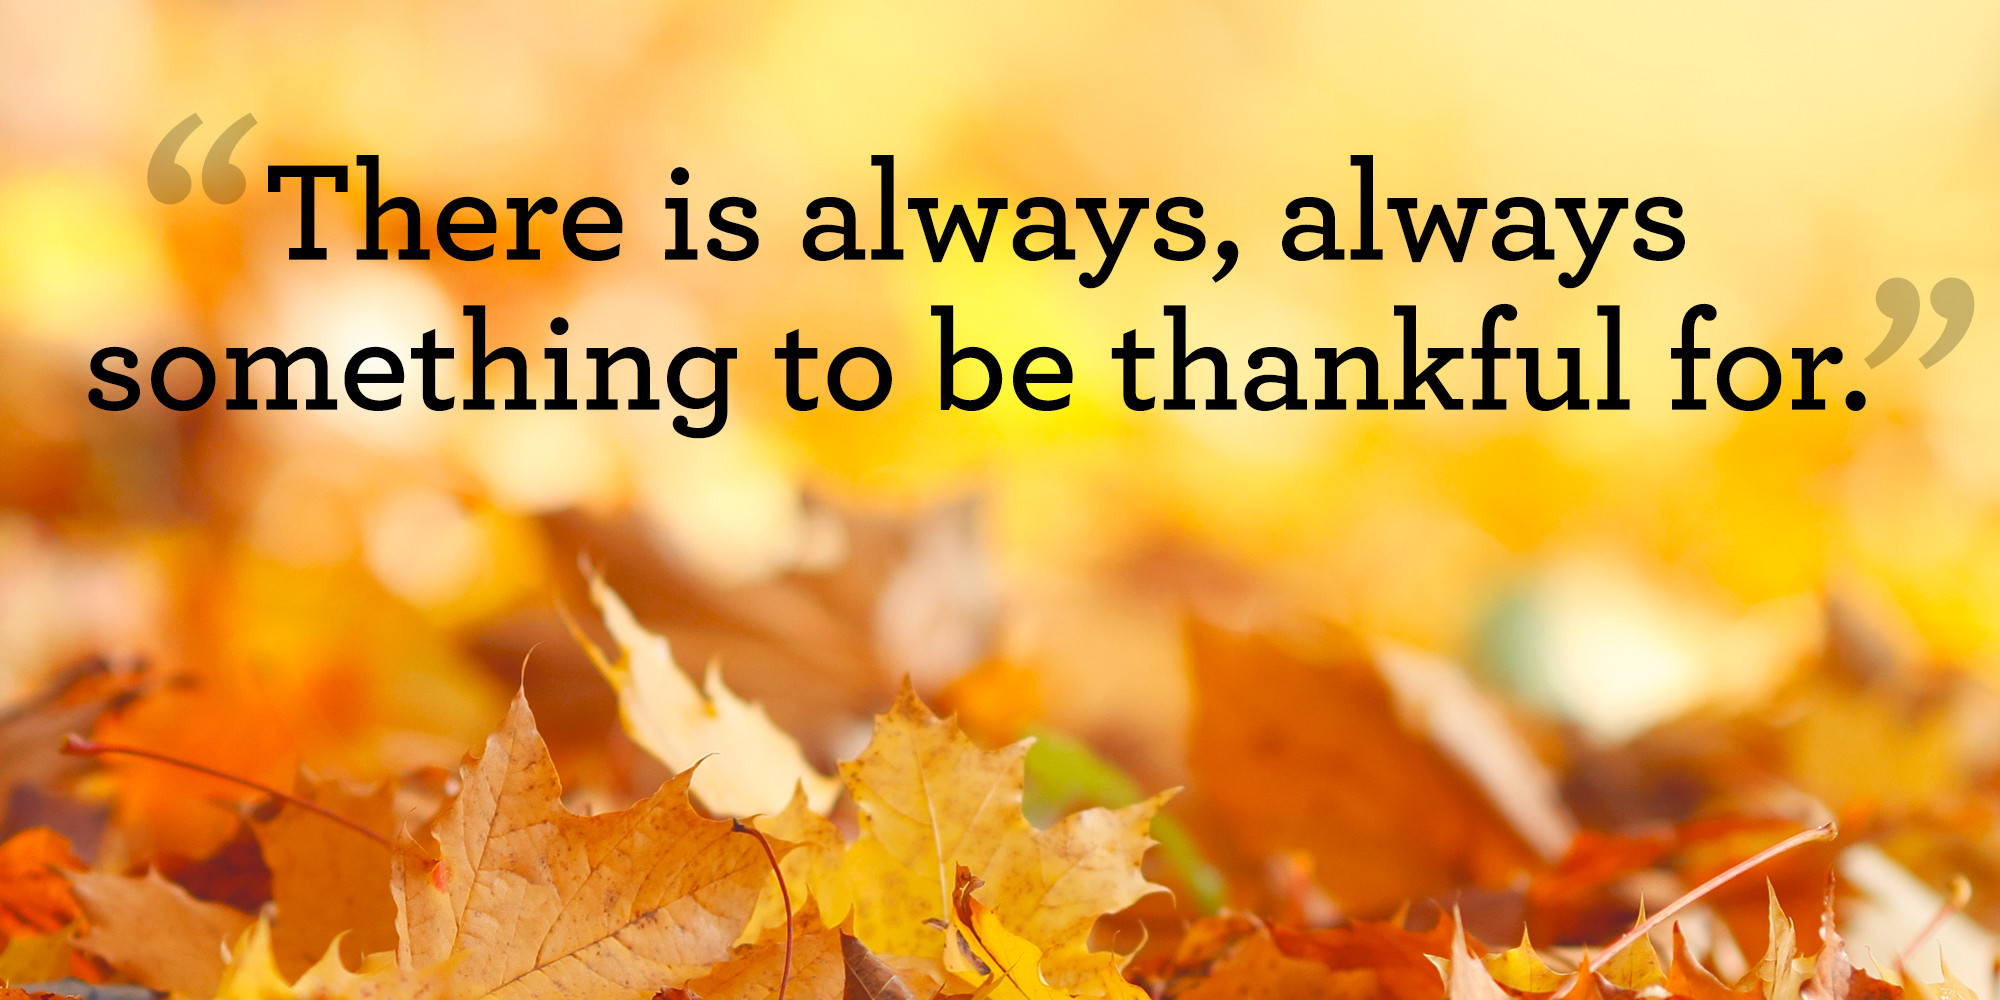 Thanksgiving Quotes And Images
 10 Best Thanksgiving Quotes Meaningful Thanksgiving Sayings